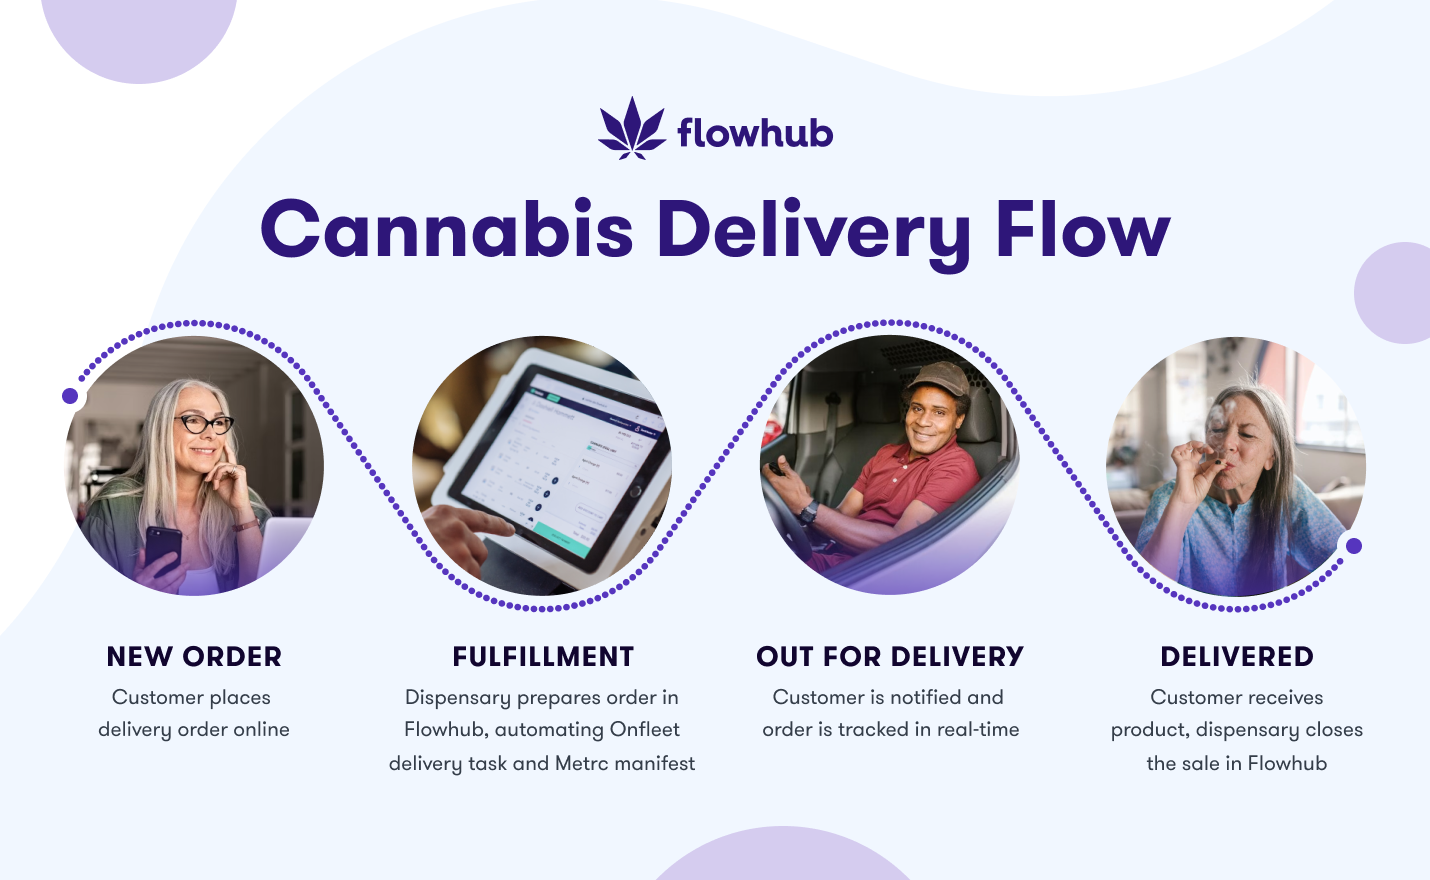 Flowhub cannabis delivery workflow